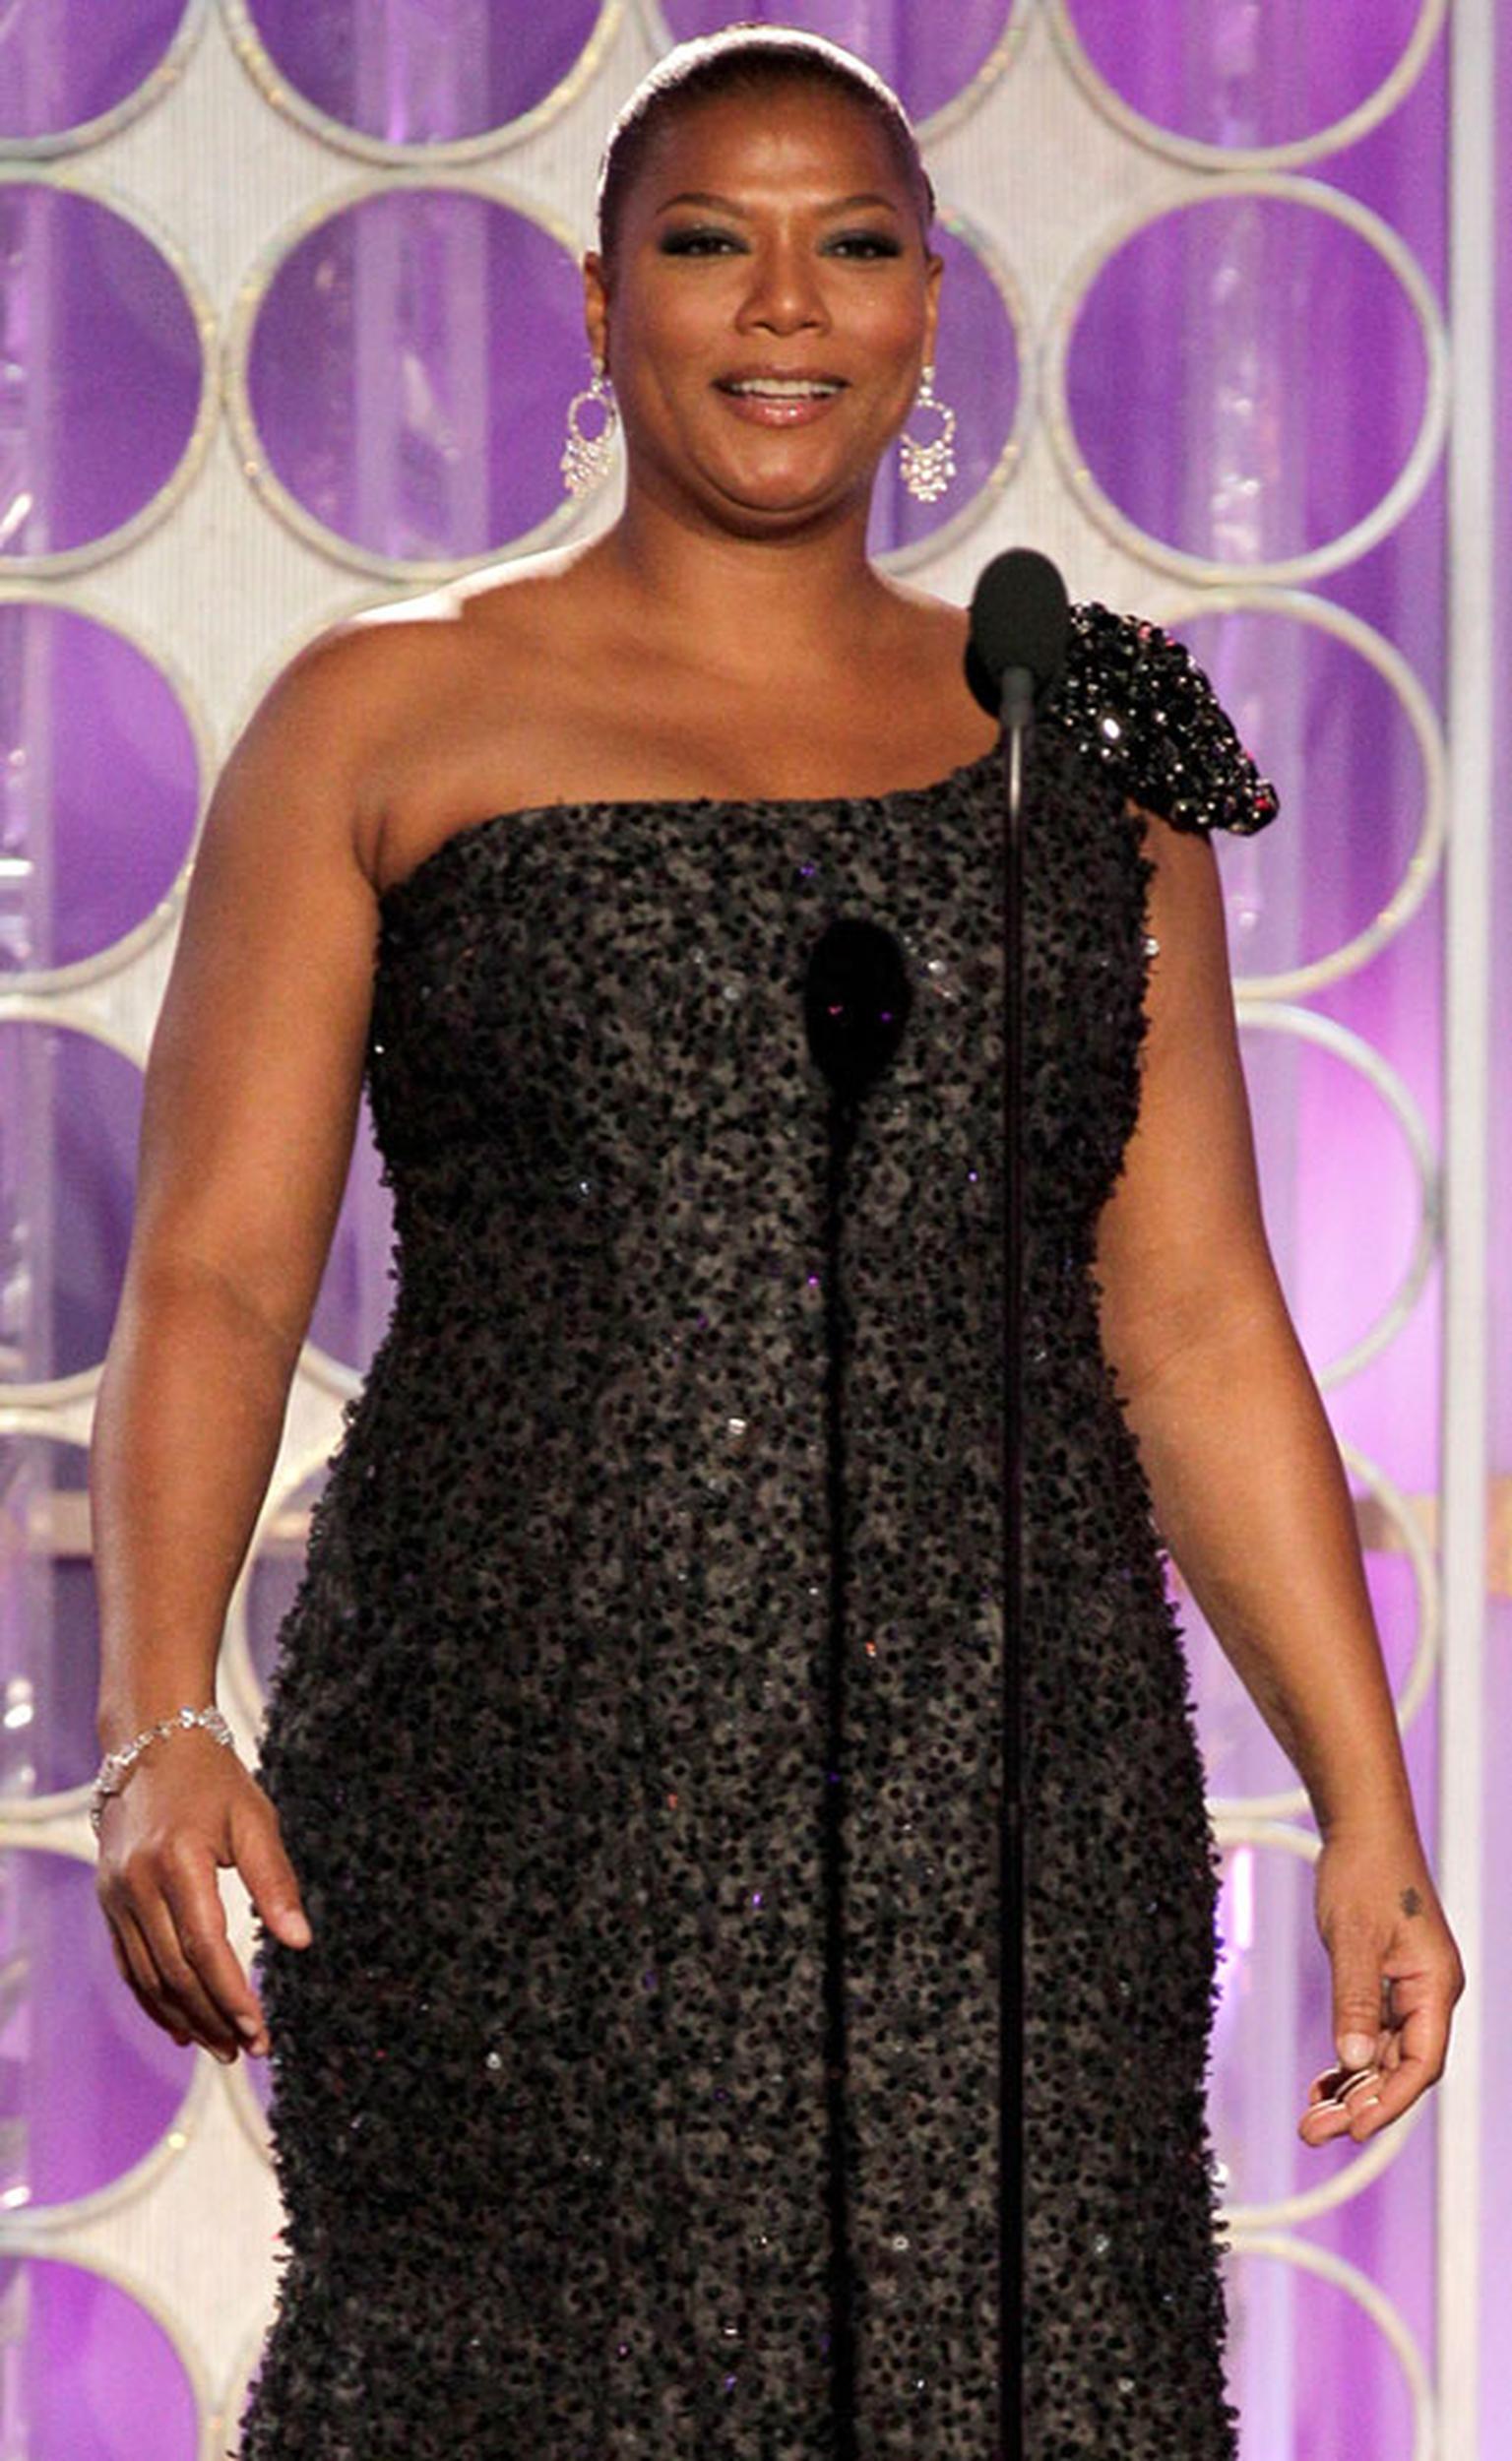 Queen Latifah wearing Chopard at the 69th Annual Golden Globe Awards - L.A., January 15th 2012